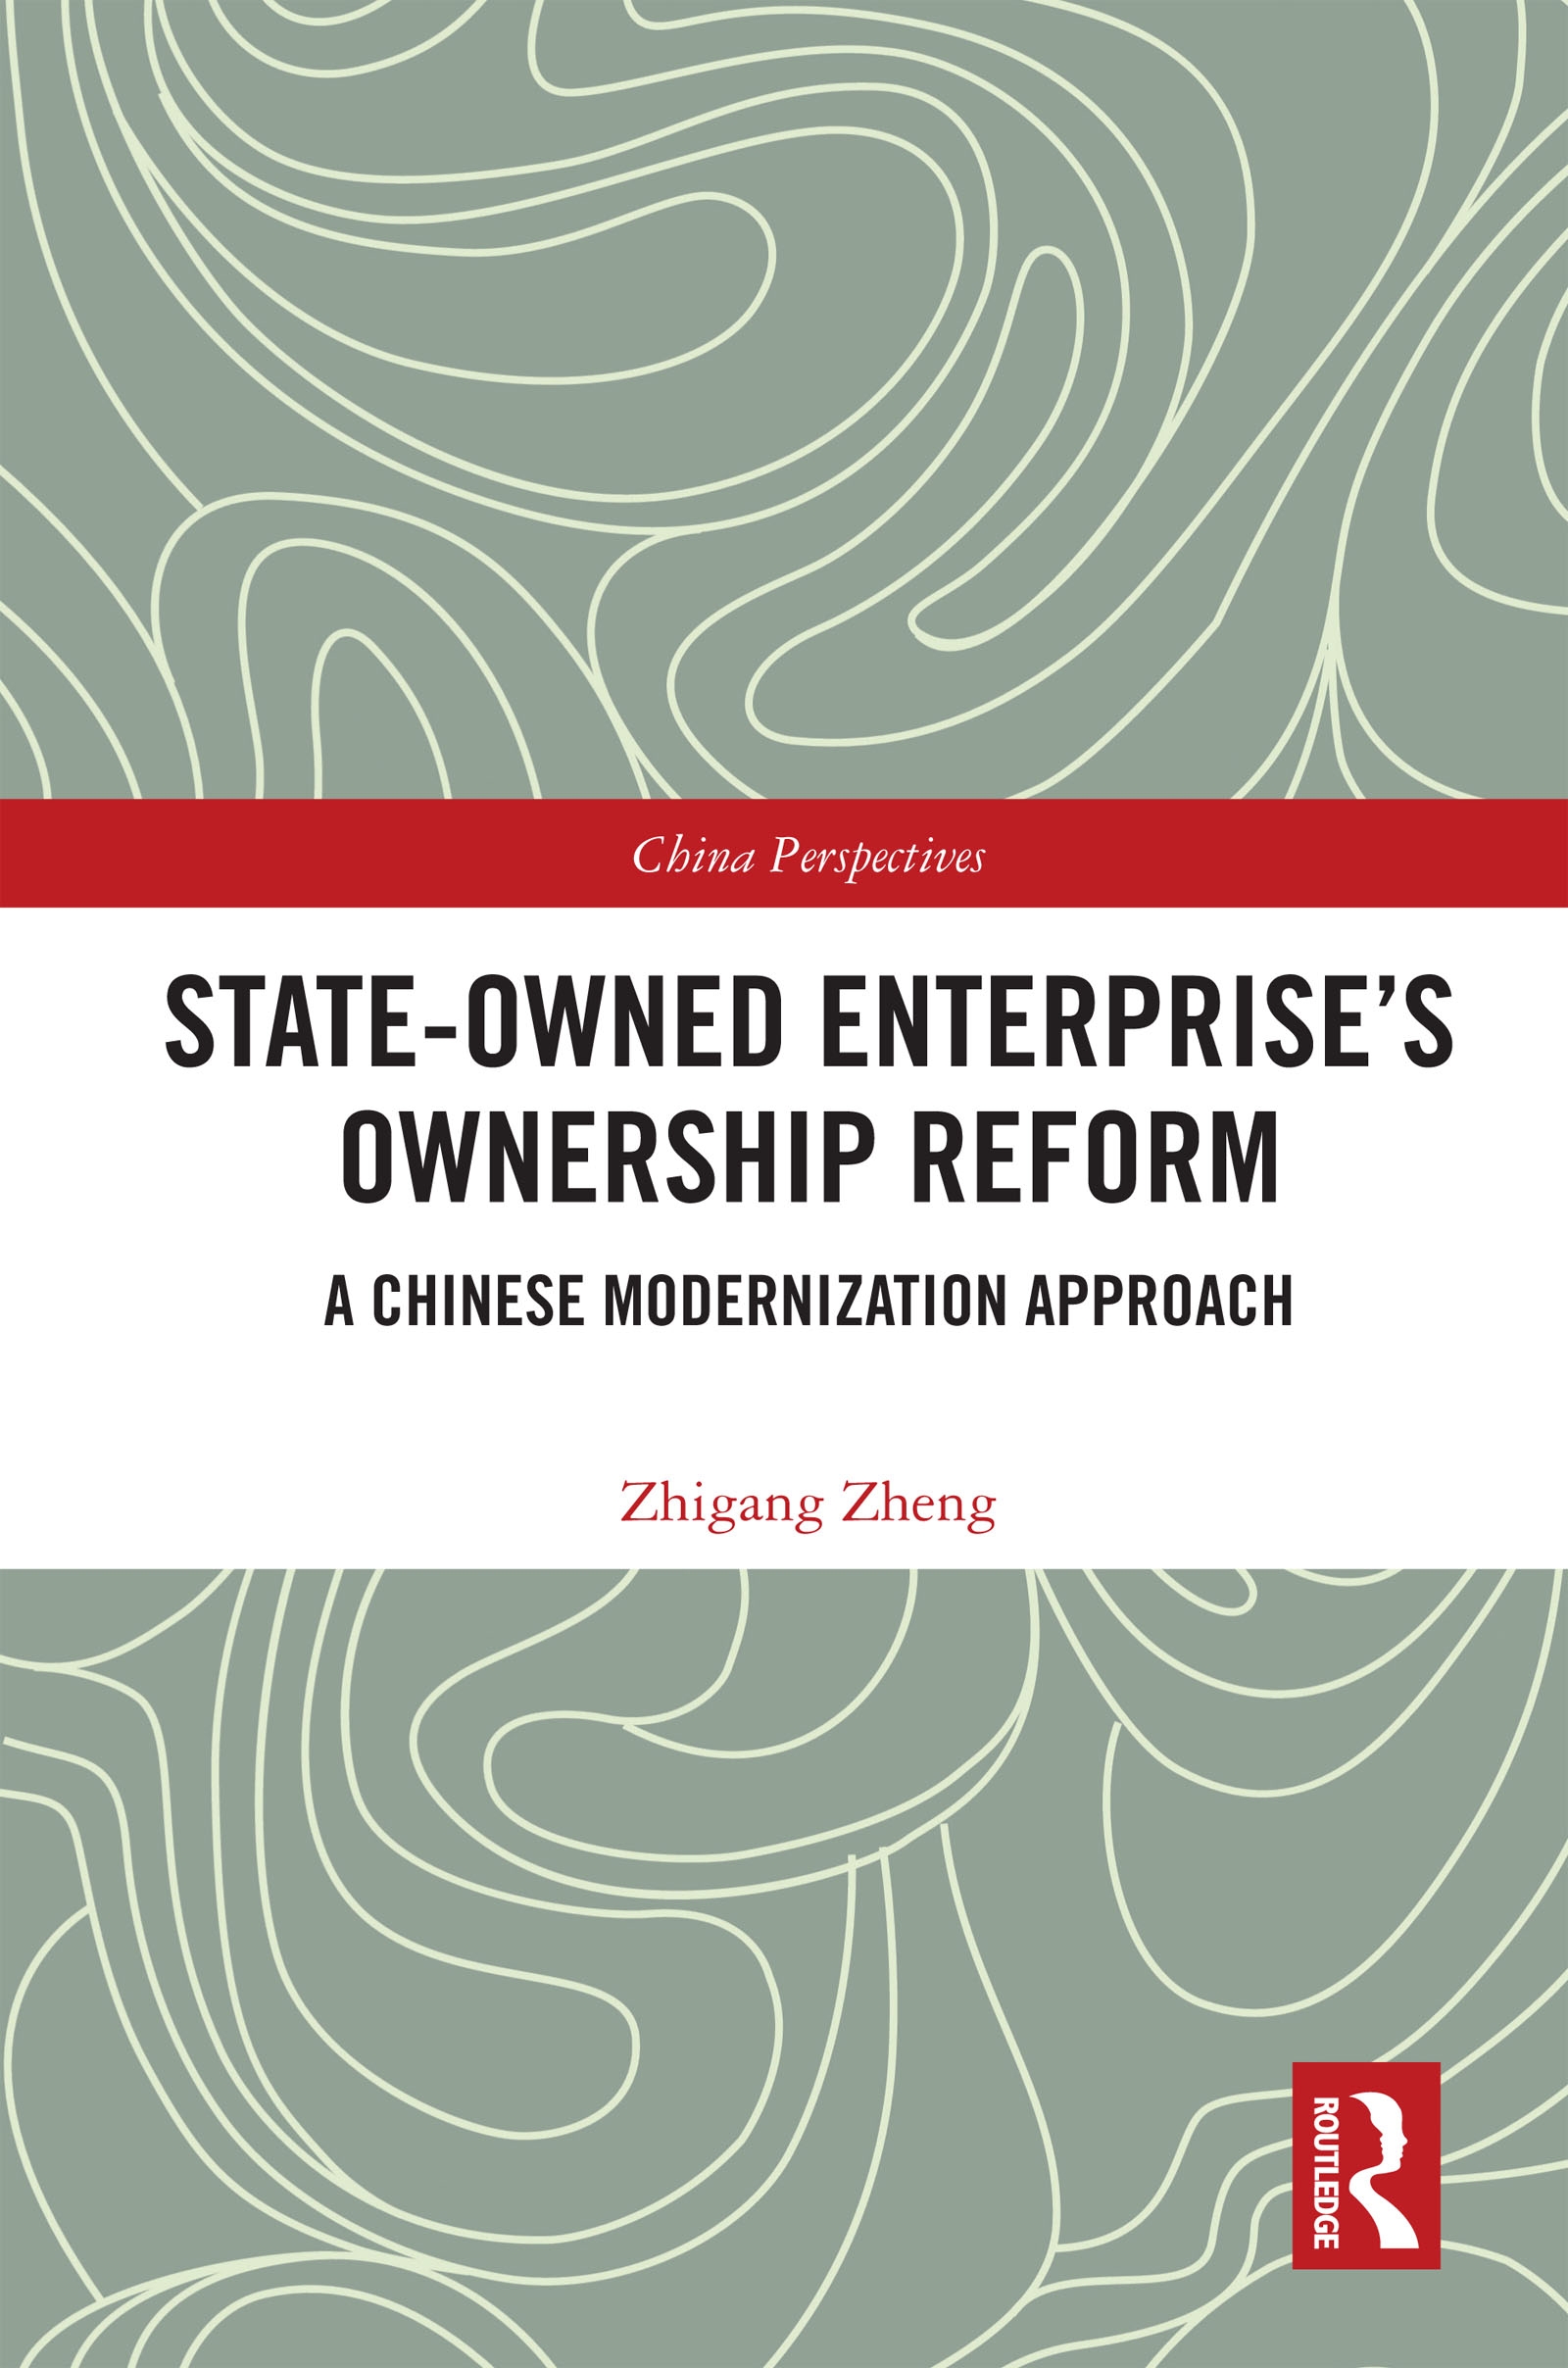 State-Owned Enterprise’s Ownership Reform: A Chinese Modernization Approach